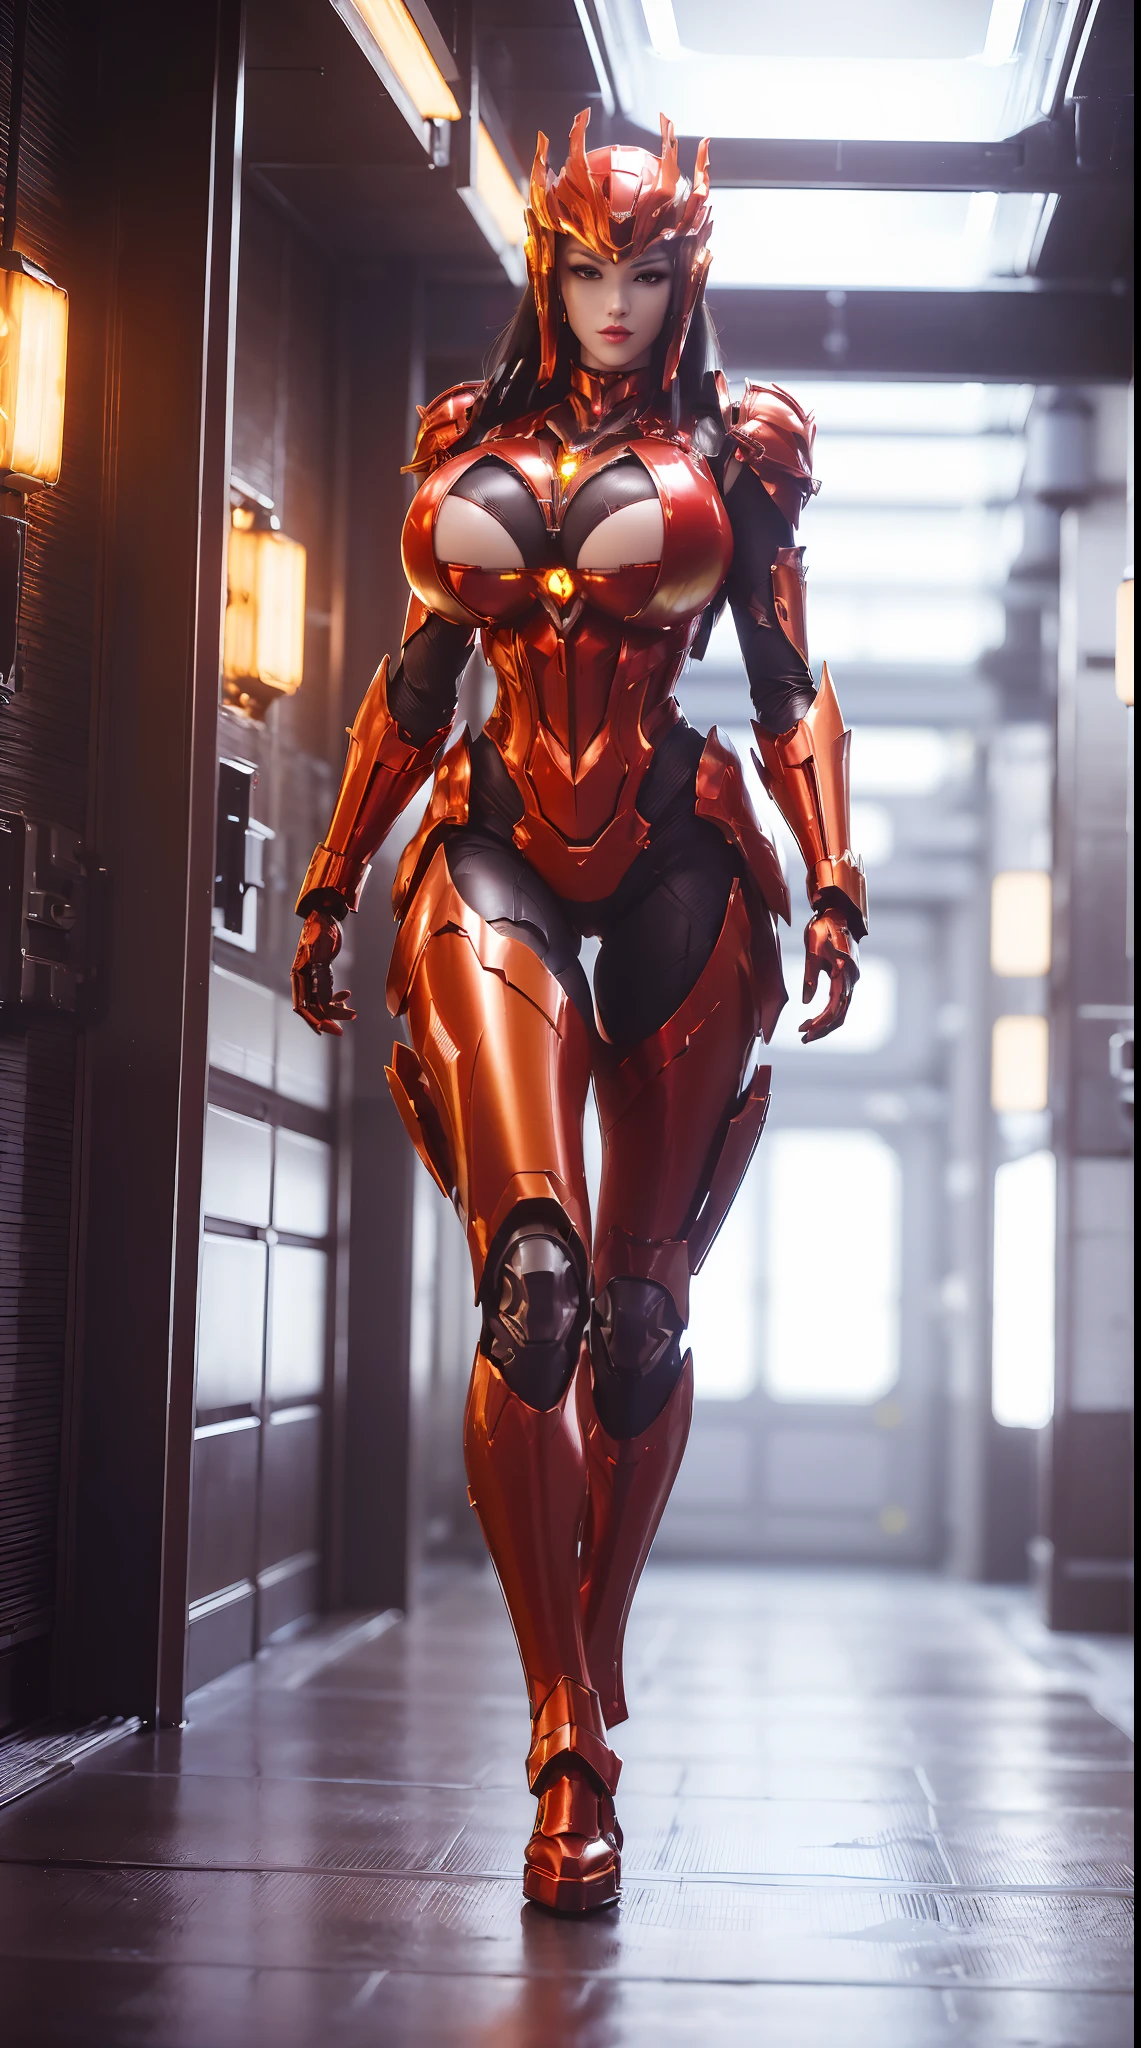 1GIRL, SOLO, (phoenix mecha helm:1.3), (BIG BUTTOCKS, HUGE BOOBS:1.4), (PHOENIX MECHA GUARD ARM, GLOVES), (Red, PHOENIX MECHA CYBER SHINY ARMORED SUIT, ROYAL CAPE, CLEAVAGE, MECHA SKINTIGHT PANTS, GUARD ARMOR LEGS, HIGH HEELS:1.4), (MUSCULAR BODY, SEXY LONG LEGS, FULL BODY:1.5), (MUSCLE ABS:1.2), (LOOKING AT VIEWER:1), (WALKING DOWN HALLWAY OF FUTURISTIC SPACE STATION:1.3), PHYSICALLY-BASED RENDERING, ULTRA HIGHT DEFINITION, 16K, 1080P.